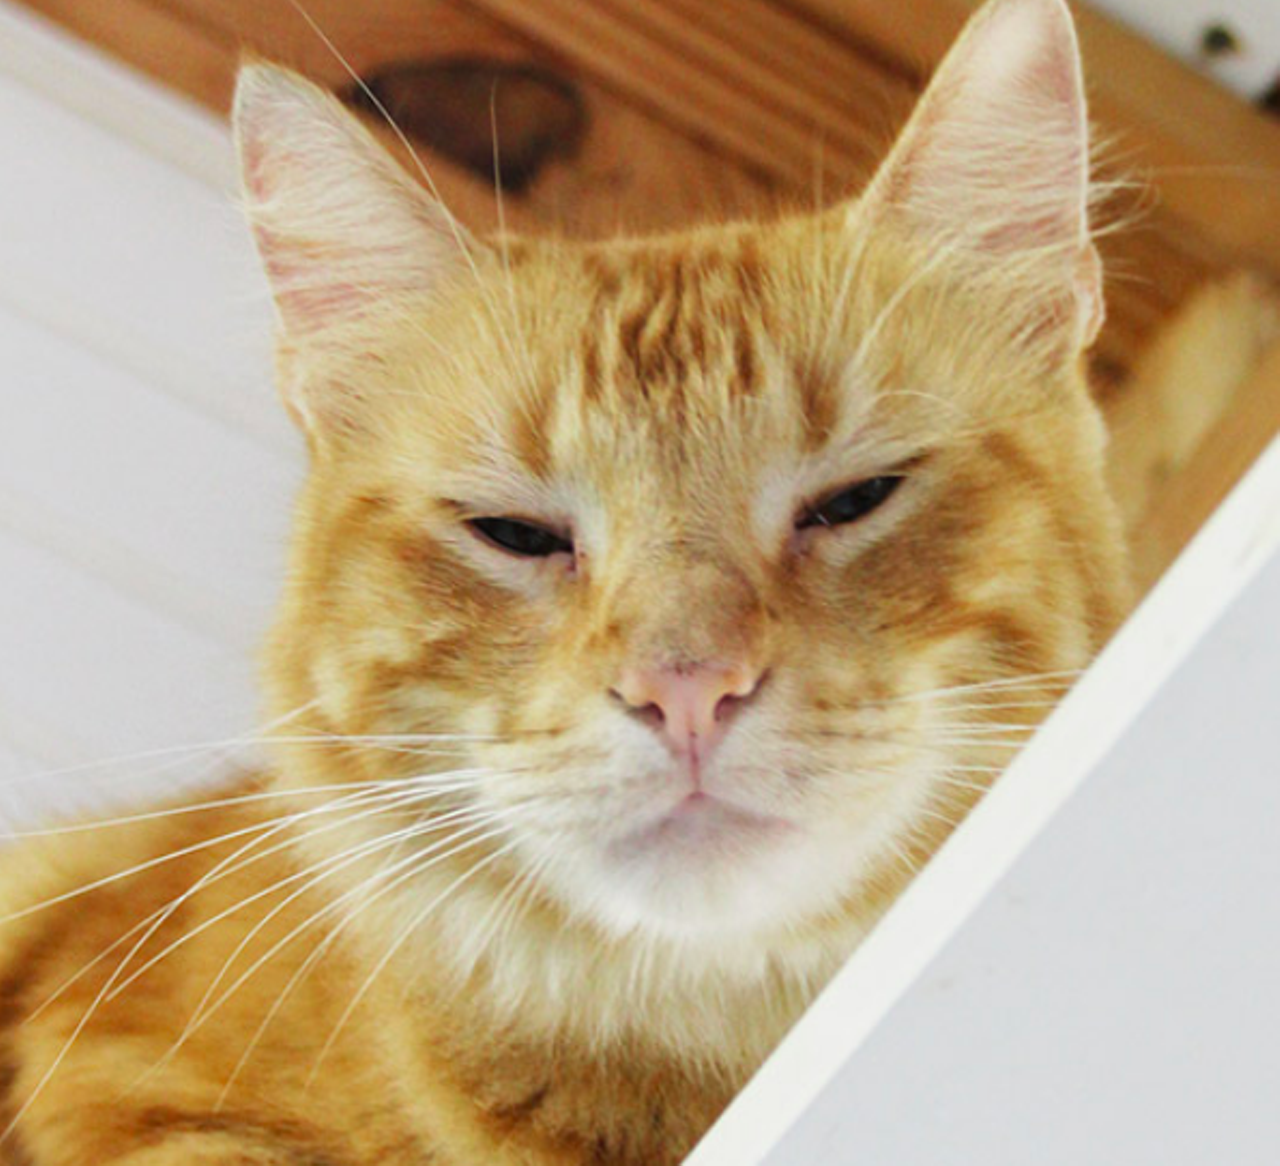 Albus
"Hello, I am Albus! I enjoy  hanging out in high spots in the cattery so that I can check out everything below me. I like to be lazy and enjoy head rubs. Overall, I’m a nice guy and aren’t I handsome? Let’s meet so that we can see if I’m the perfect friend for you!"